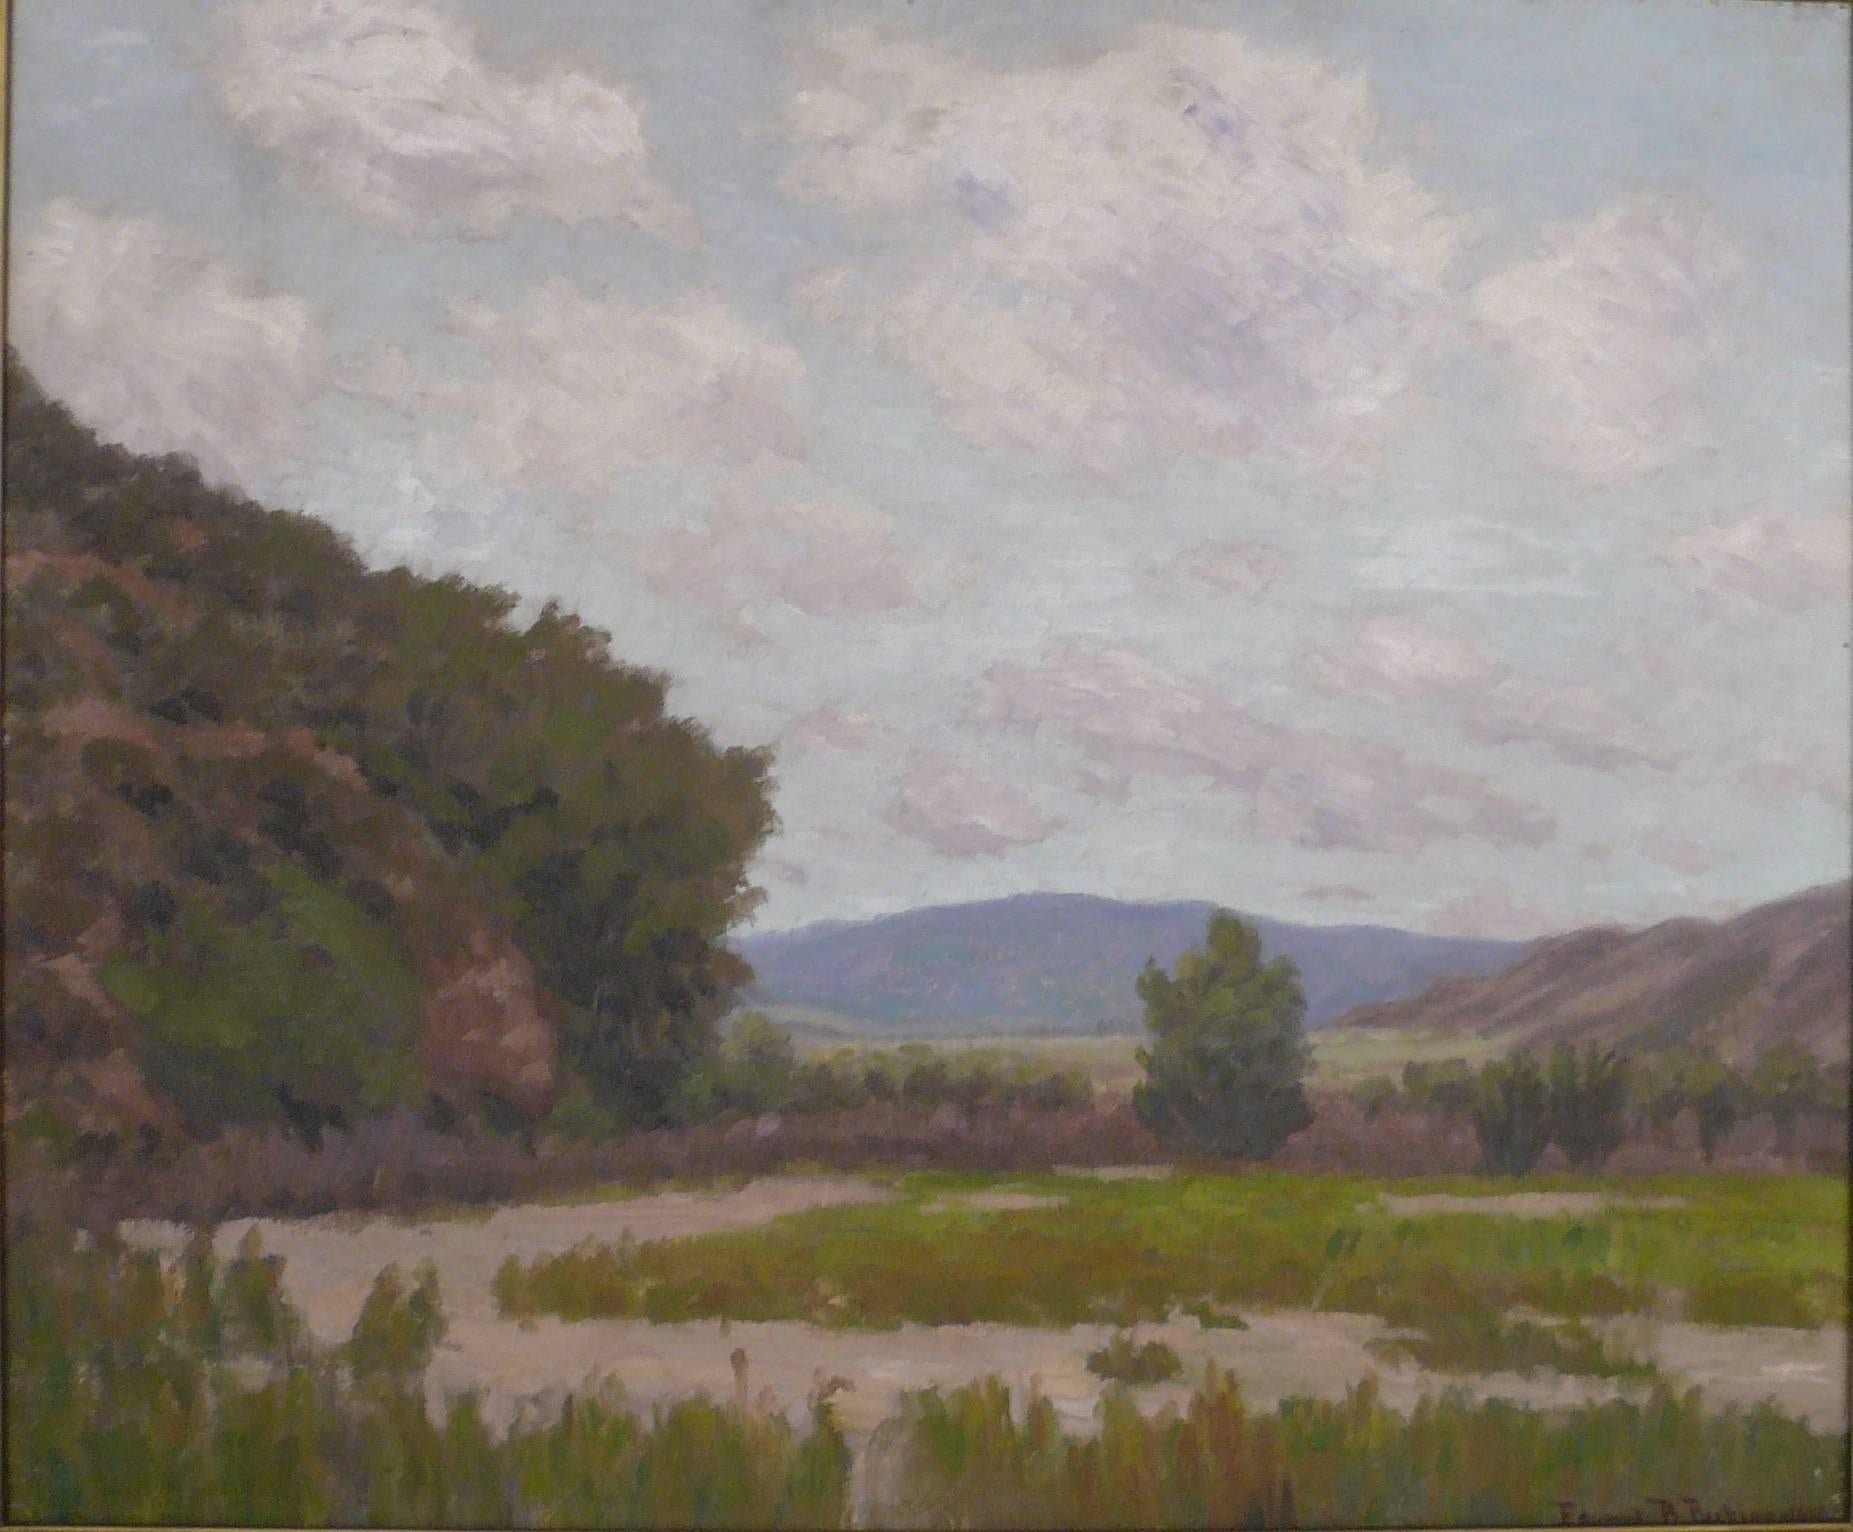 Edward Burgess Butler, 1853-1928, studied with F. C. Peyraud. He was exhibited at The Art Institute of Chicago, and The Panama-Pacific International Exhibition of 1915.
This painting is in excellent condition, and retains its original American Arts